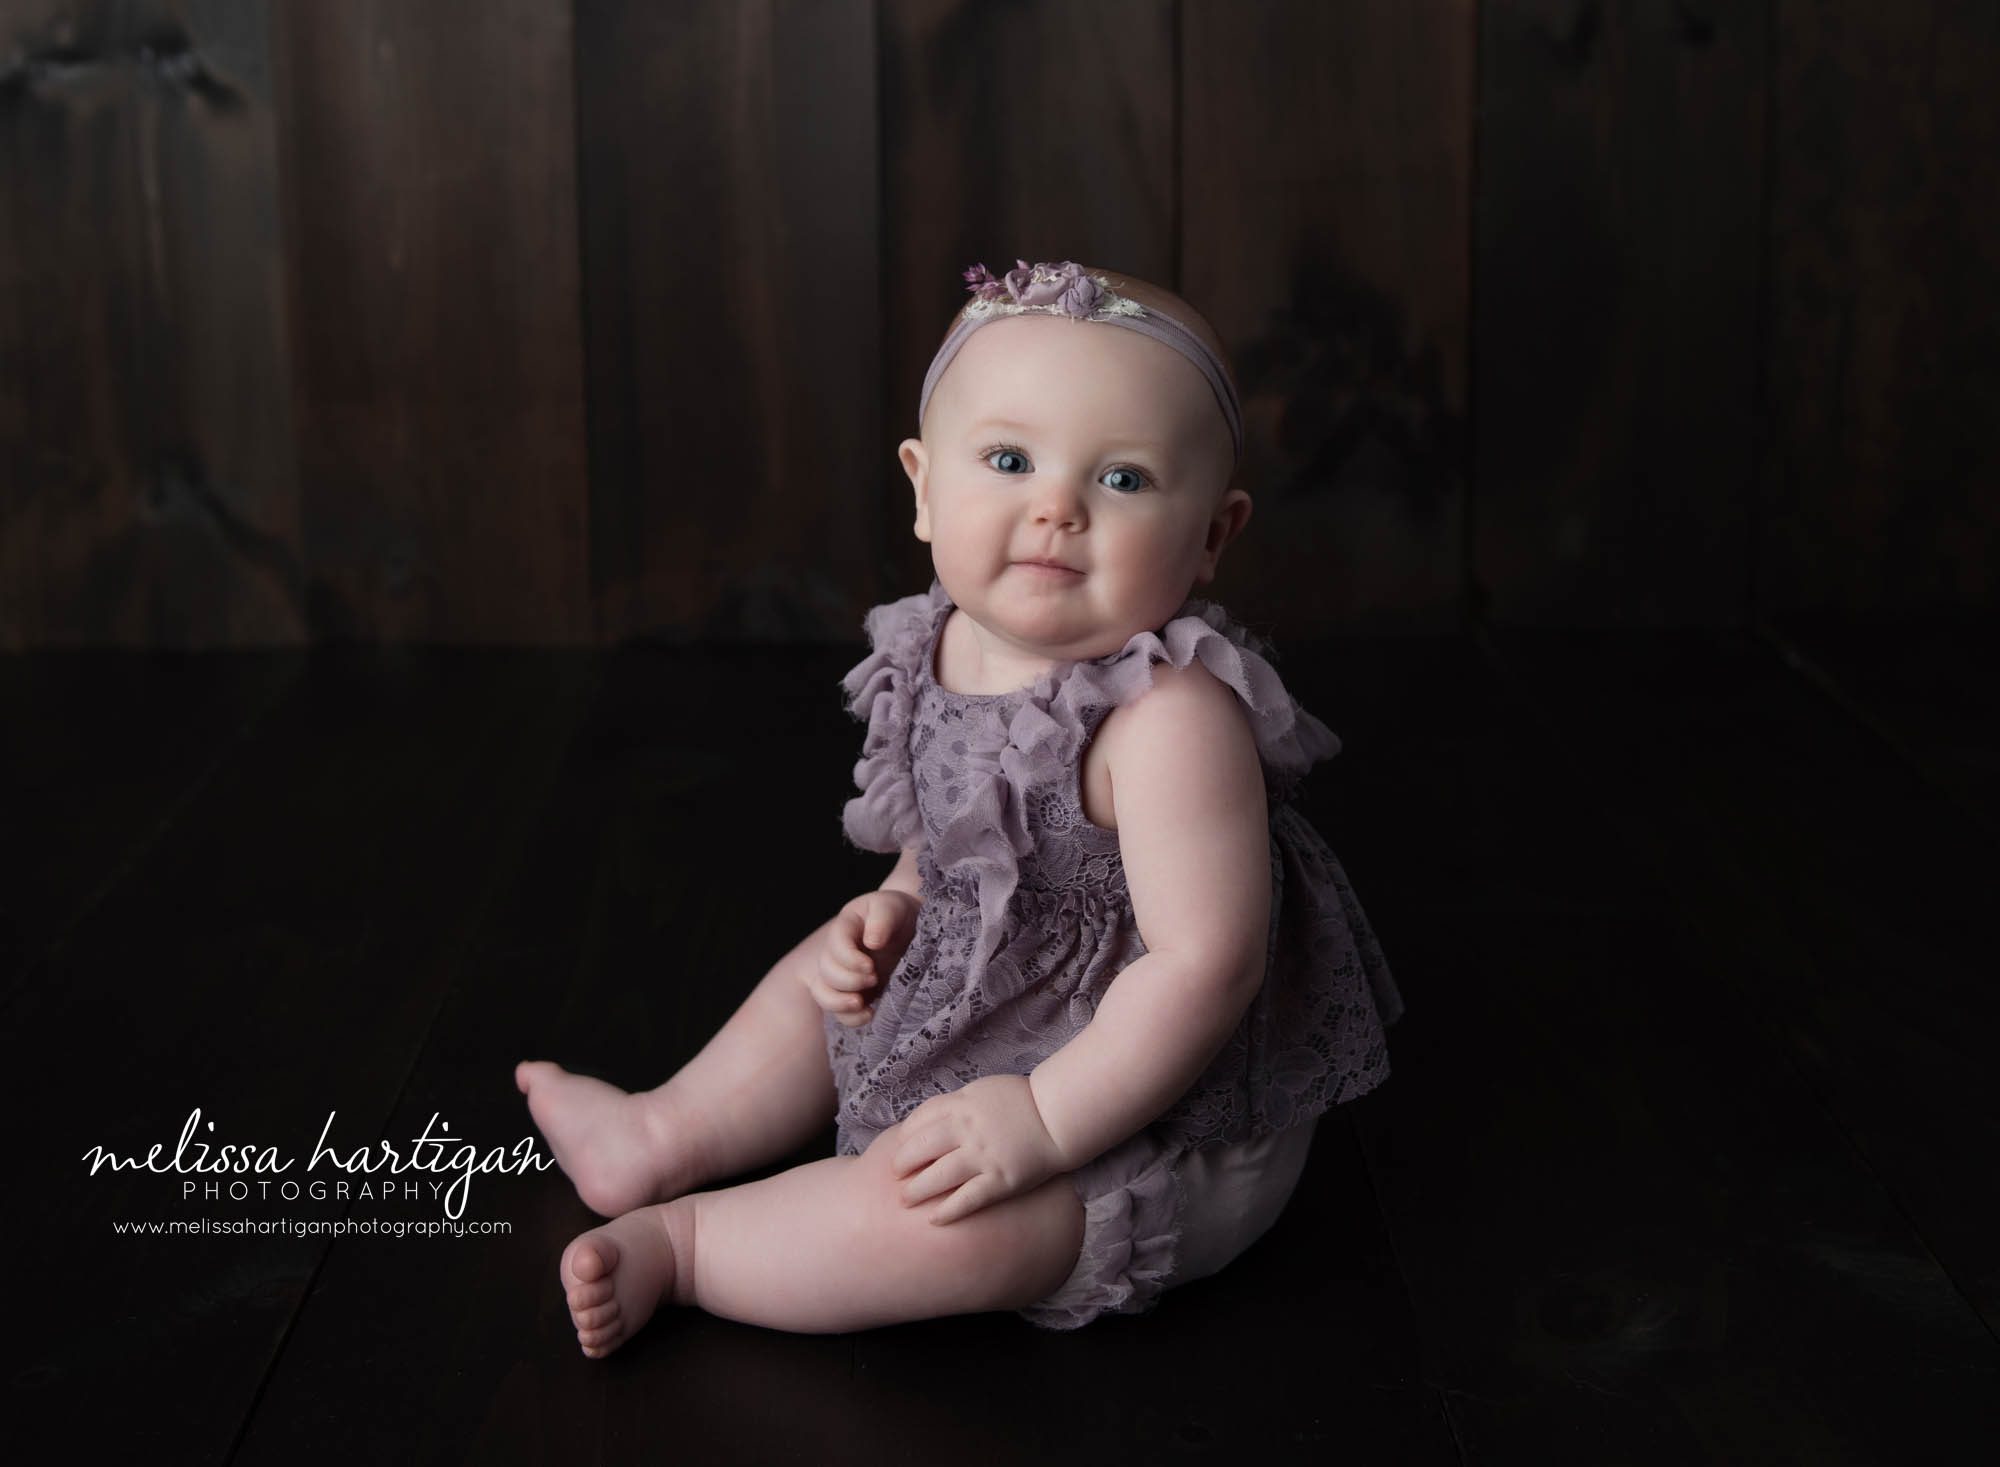 Baby girl sitting on wooden boards in CT Baby photography studio session capturing her sitting up unassistant baby milestone